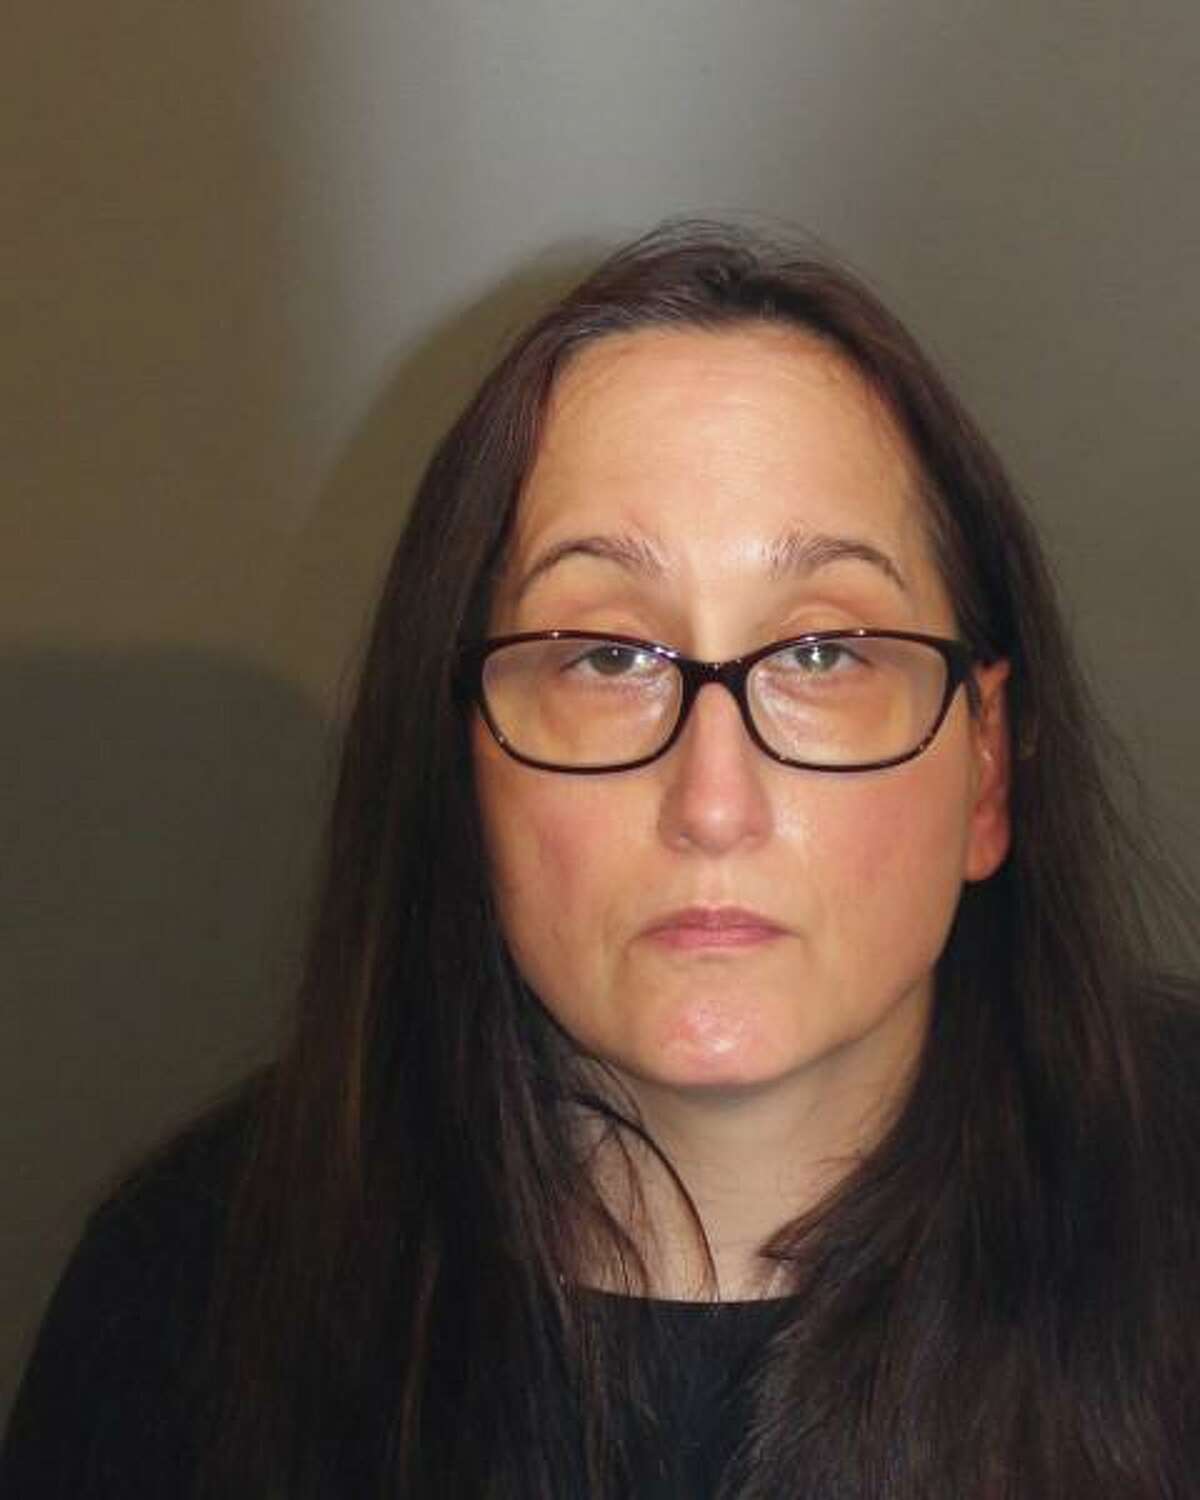 Danbury police arrested Lisa Gardner, 51, on May 31, 2022 on conspiracy to committ sexual assault and other charges.